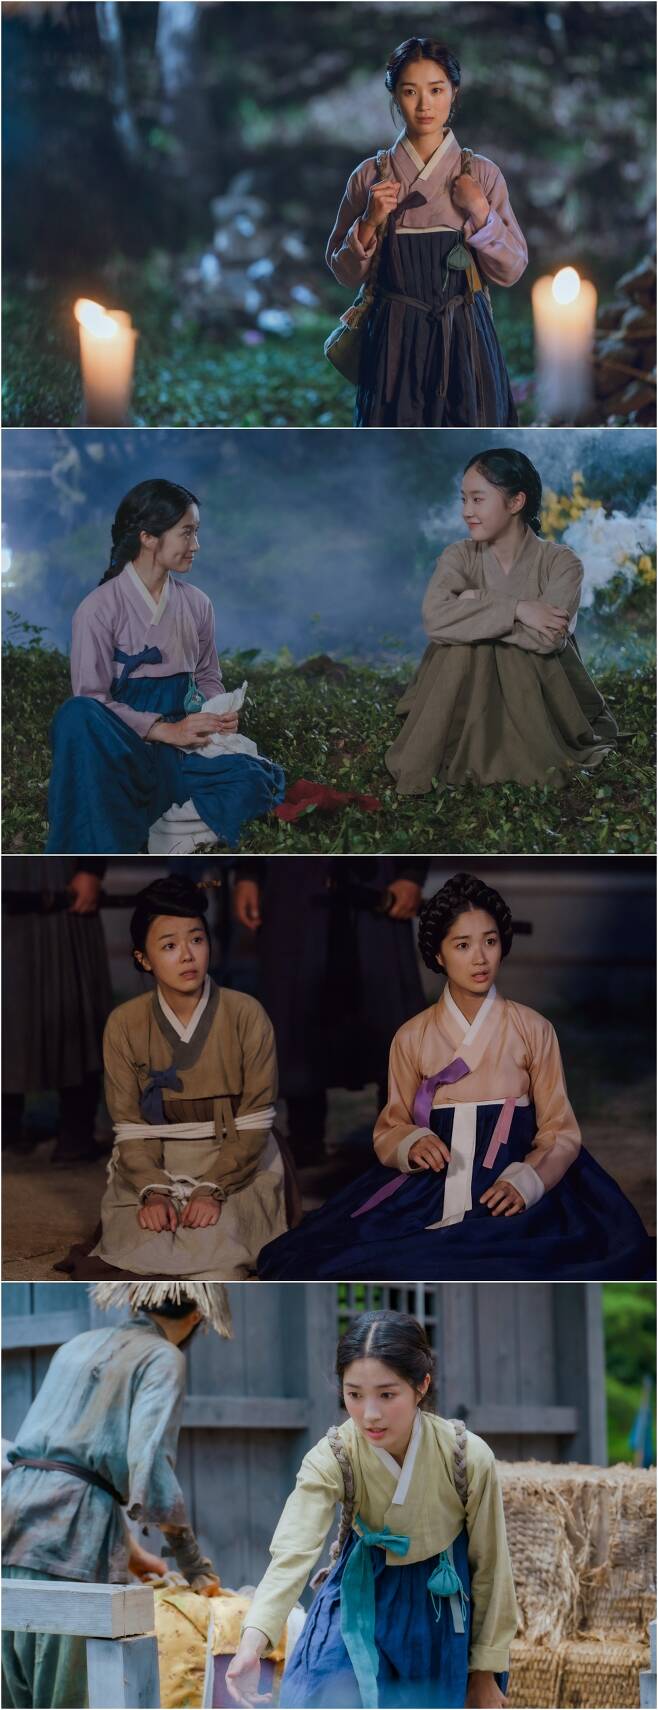 Kim Hye-yoons turbulent adventure that ran out of Essa and Joy gyubang begins.On November 8, TVNs 15th anniversary special project, Drama Assa and Joy (directed by Liu Cong Sun, playwright Lee Jae-yoon, production studio Dragon and Moncjax), revealed the appearance of Kim Joy (divorced wife) who came out of the world in search of happiness on October 25.It captures Bori (Chae Won-bin) and Gwang Soon (Lee Sang-hee), who will add strength to Joys performance, and makes the sticky and special Korean version of Warmance more anticipated.The investigation of the cheerful comic couple of Joy, the wife of the quirk who rushes for happiness, and the gourmet gourmet Doryul Ian Thorpe (Ok Taek Yeon), who has been pushed to the ground by a mess.Liu Cong Sun, who directed Drama 60 Days, Designated Survivor, and Why Secretary Kim Will Do, and Lee Jae-yoon, who wrote the films Gulcops, Drama Hoonnamjeongeum and Tamna Doda, will complete a comic drama of different charms.Above all, there is a hot expectation for the synergy of OkTaek Yeon and Kim Hye-yoon, which will break the comic potten with the combination of the hallucinations.Ian Thorpe, a civil servant of Manrep, and Joy, a bulldozer wife who breaks the tight customs, are looking forward to the laughter that will be presented by the new combination play.In the meantime, the photo shows Joy leaving the room and heading to the wide world, which is interesting. Joy, who has been ambitious at night with only one botty.Joy and Barleys steam friendship Chemie, who exchange faith-filled eyes toward each other in the ensuing photo, also attract attention.It is because of the strong Friend Barley that Joy was able to achieve his dream of divorce even in the gossip of the villagers.Joys suffering continues day and night, surrounded by someone, and the look of two people who were surprised by the sight before them shows that an unusual incident occurred.The two people who met for the first time on this day unexpectedly cross the hurdles of life and death.It is also worth noting the combination of two people who will be active as brains after joining Ian Thorpes detective duck investigation team.Meanwhile, Joy, who knows how to reach out to others first after many dangers, shows his warm heart: Joy, who ran out of the room and started to stand alone.It is noteworthy how to meet with Asa Ian Thorpe and draw the second act of life.